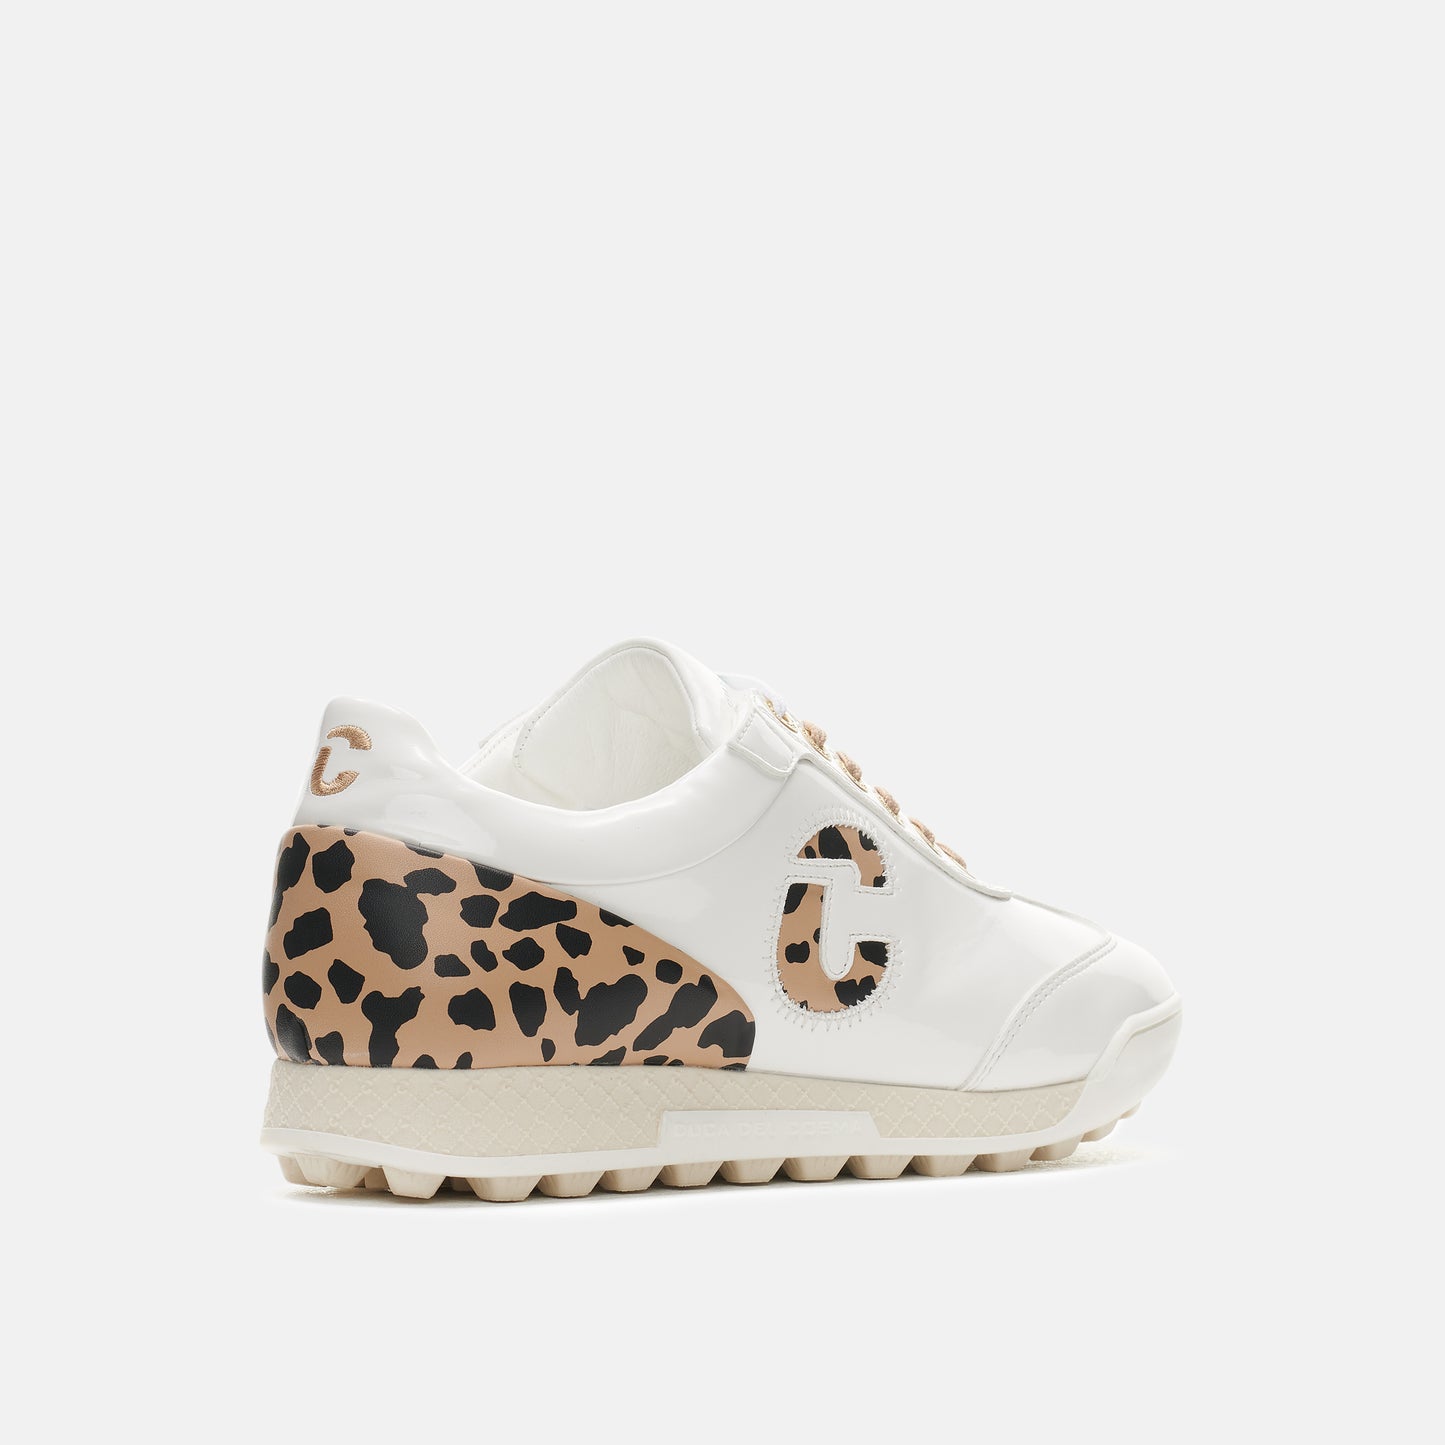 Duca del Cosma's King Cheetah White Women's Golf shoe fully waterproof with animal print from duca del cosma